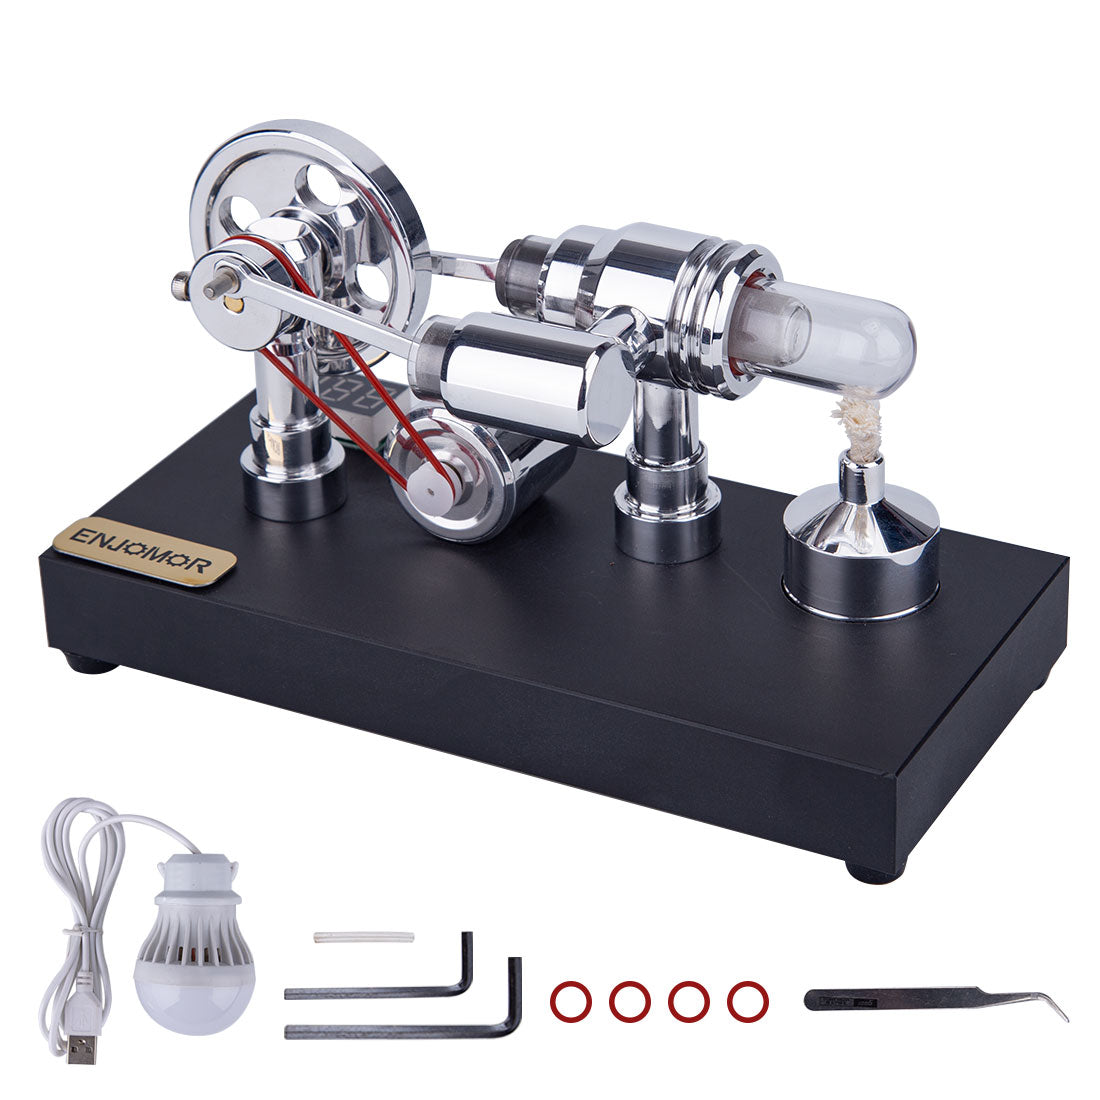 ENJOMOR Metal Gamma Hot-air Stirling Engine Model with Bulb Educational Toys Gifts